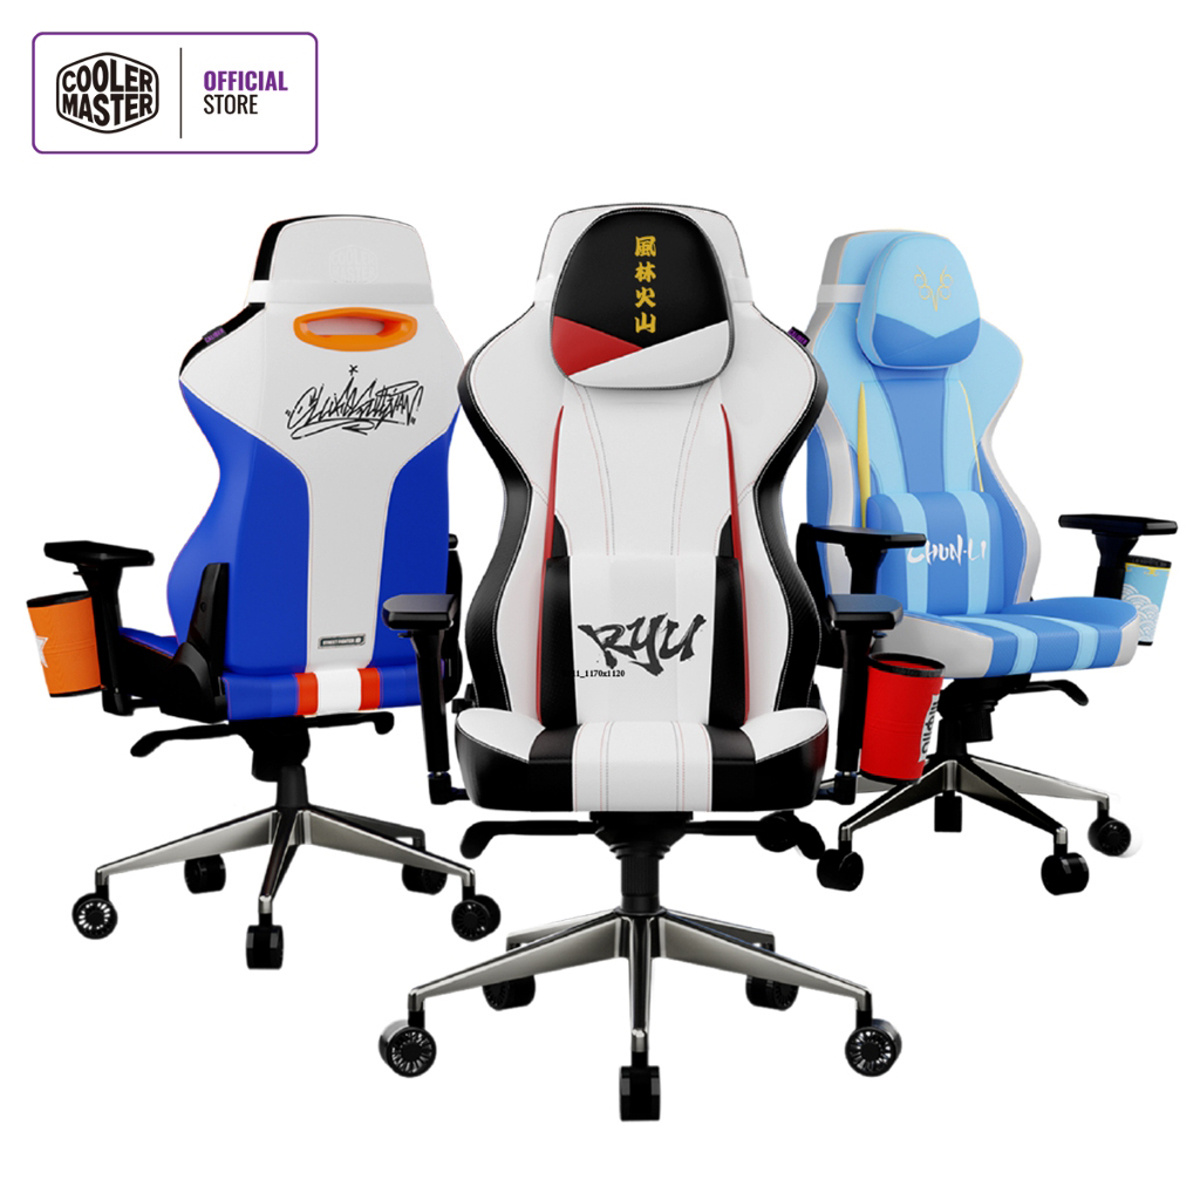 Cooler Master Caliber X2 Street Fighter 6 gaming chairs